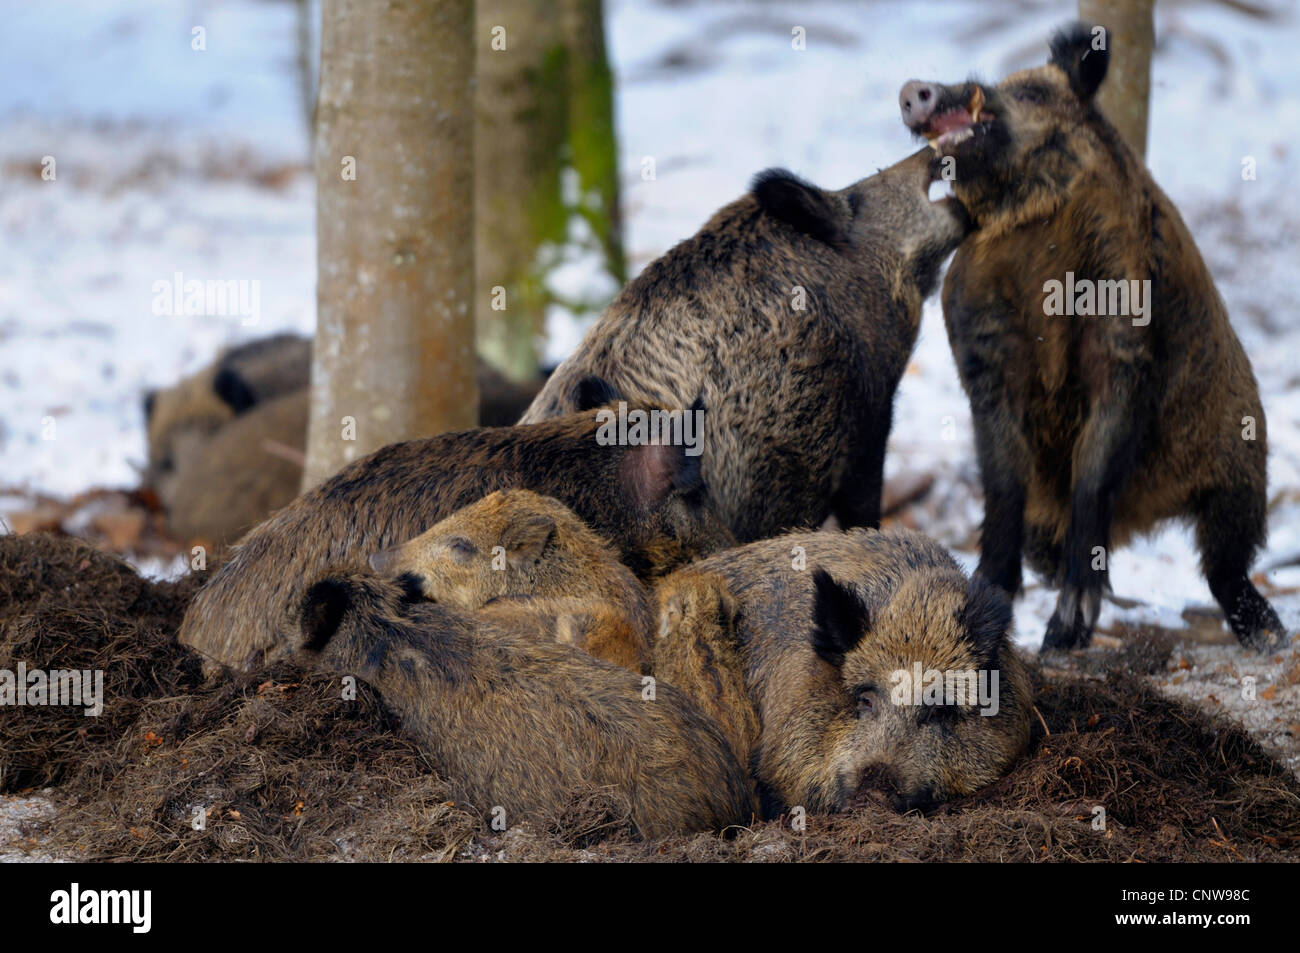 wild boar, pig, wild boar (Sus scrofa), pack in snow-covered landscape restin at a snow-free place under trees, Germany Stock Photo